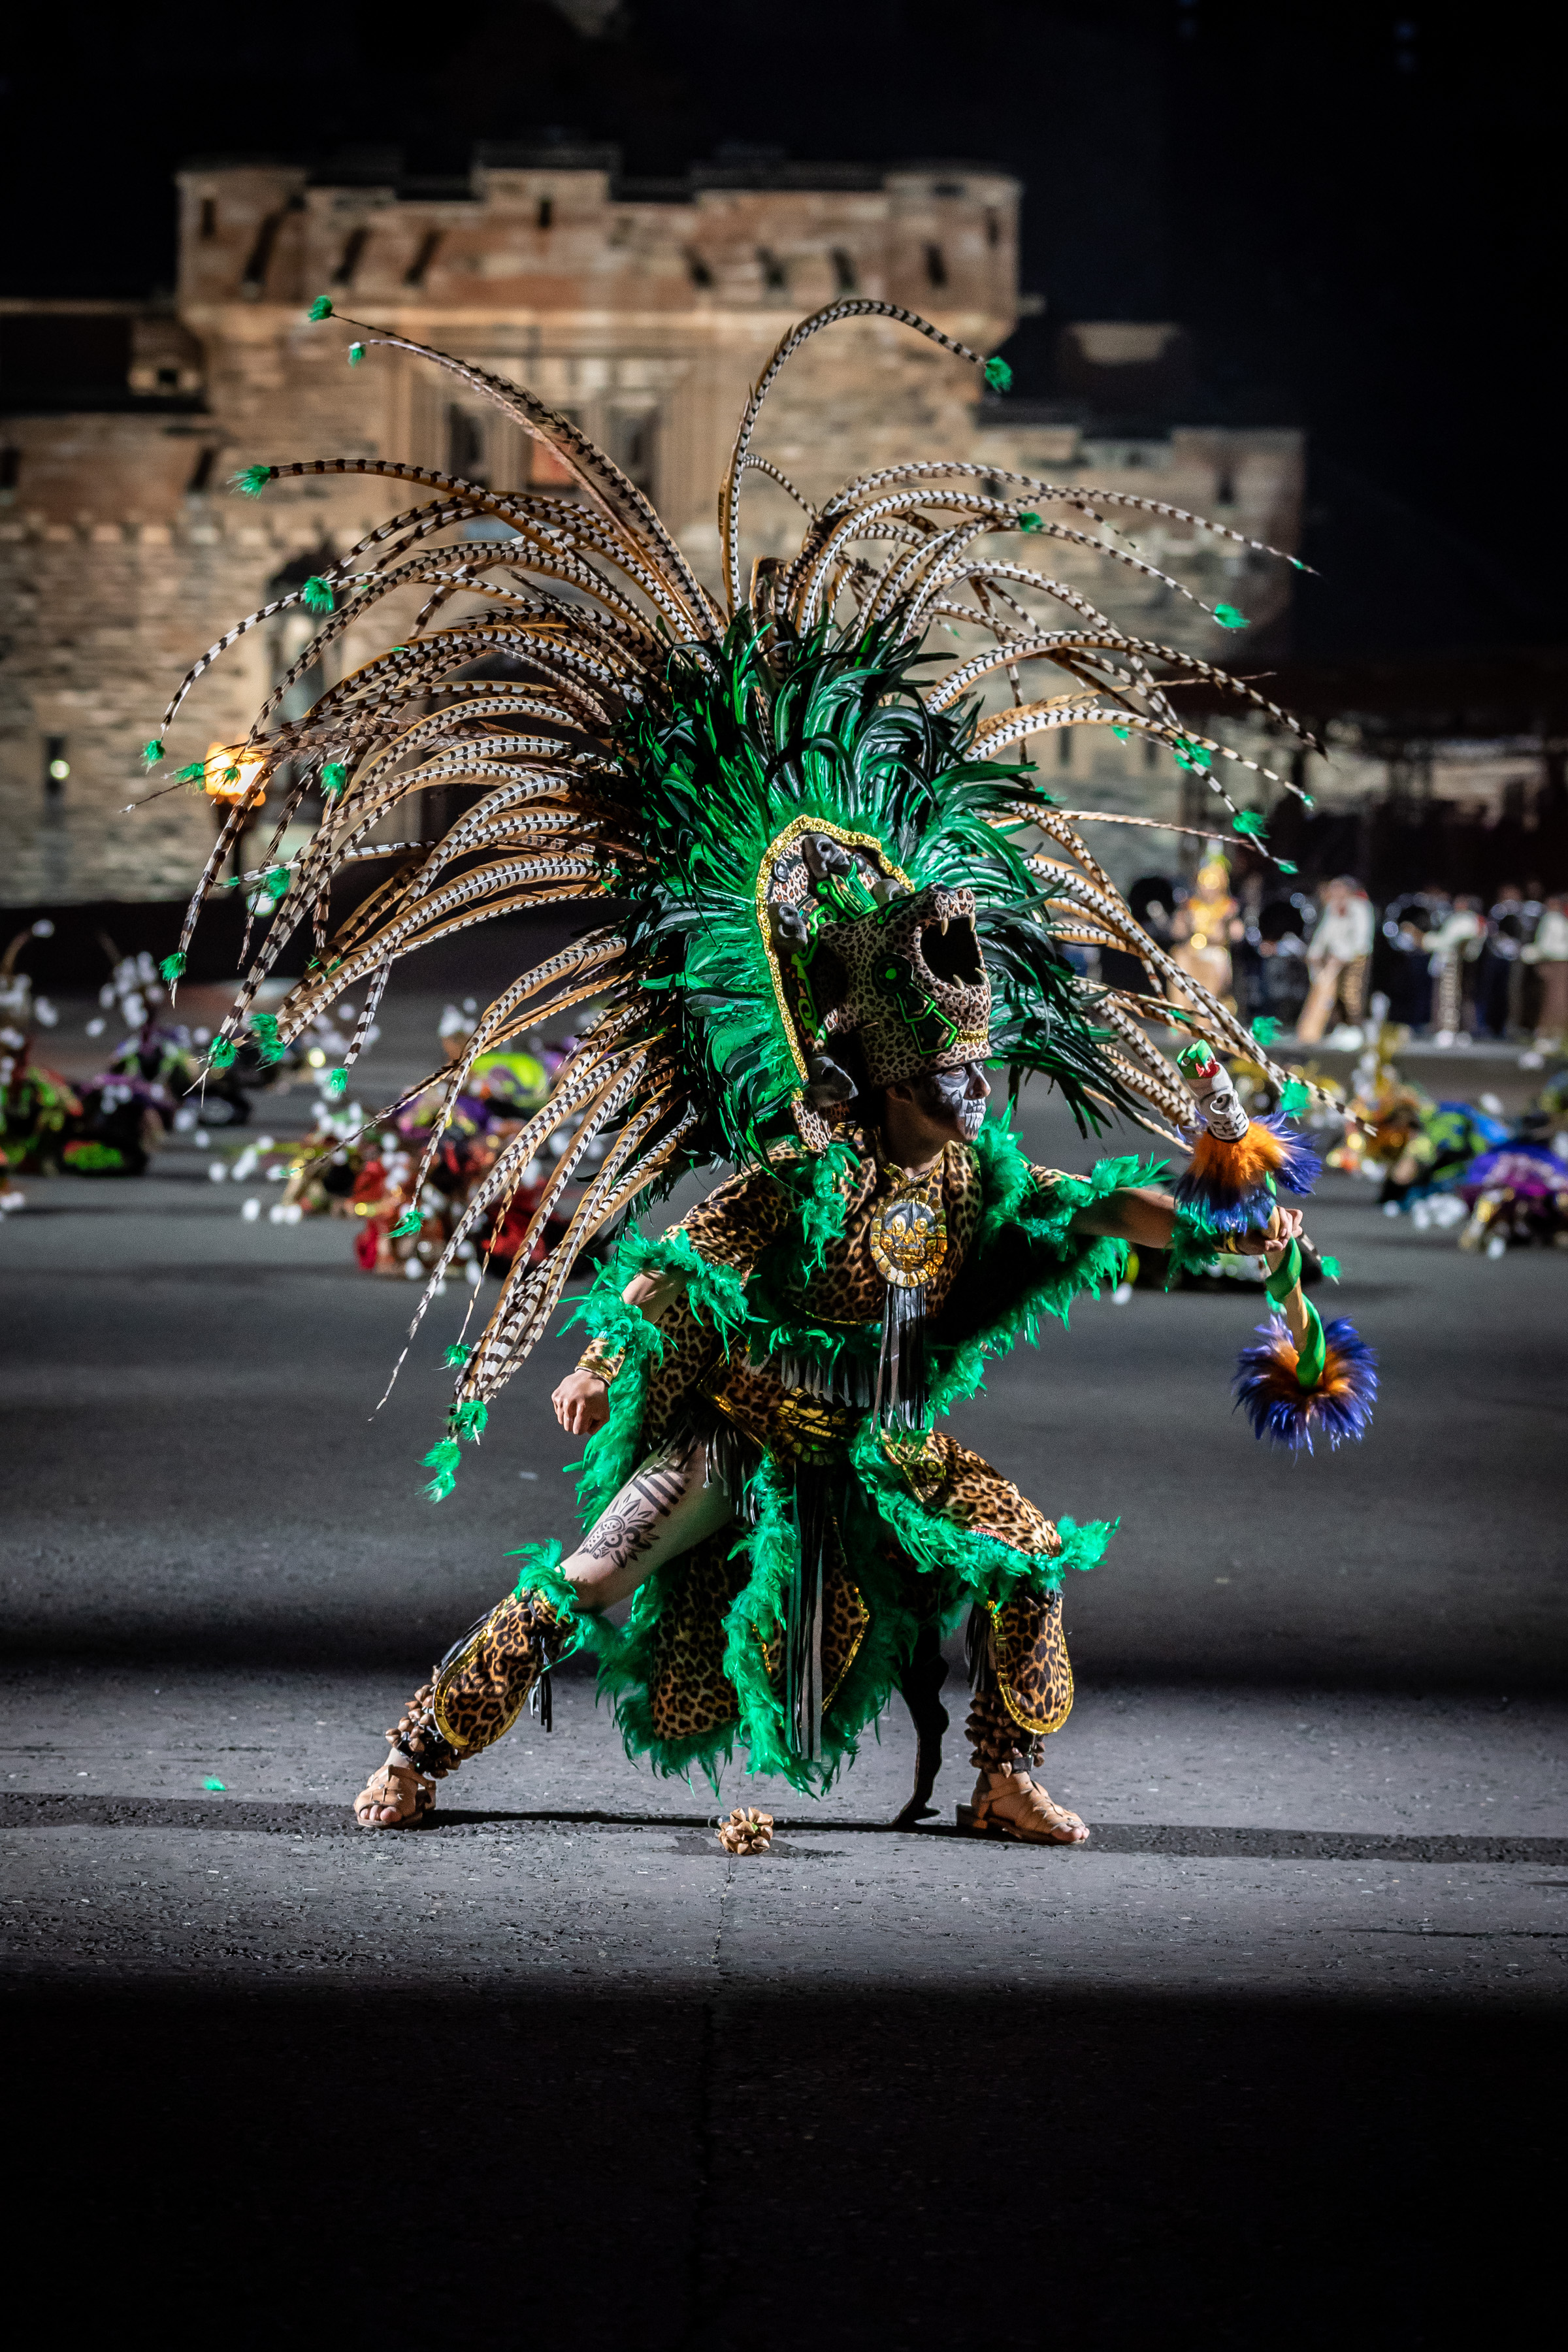 Image shows a Mexican performer wearing green feathers costume and a cheetah head dress.